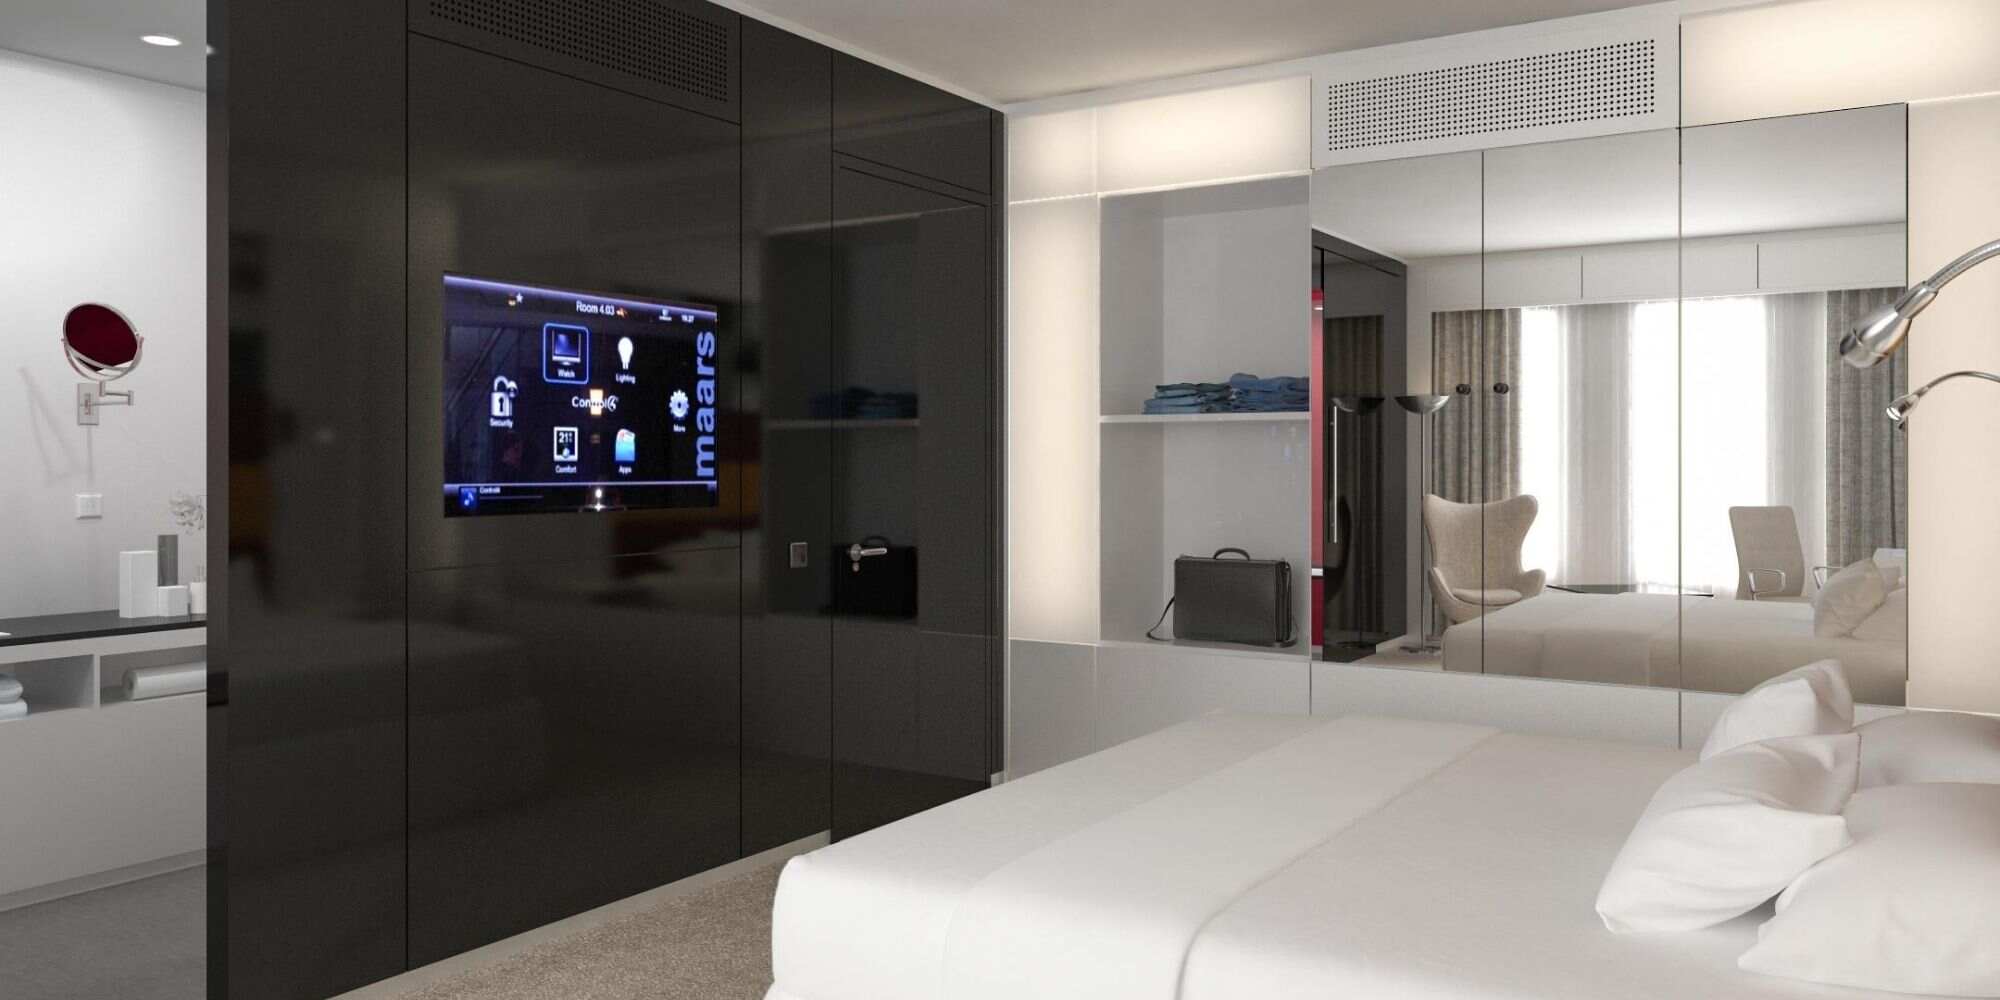 hotel room with washroom view depicting building automation systems via 3d renderings